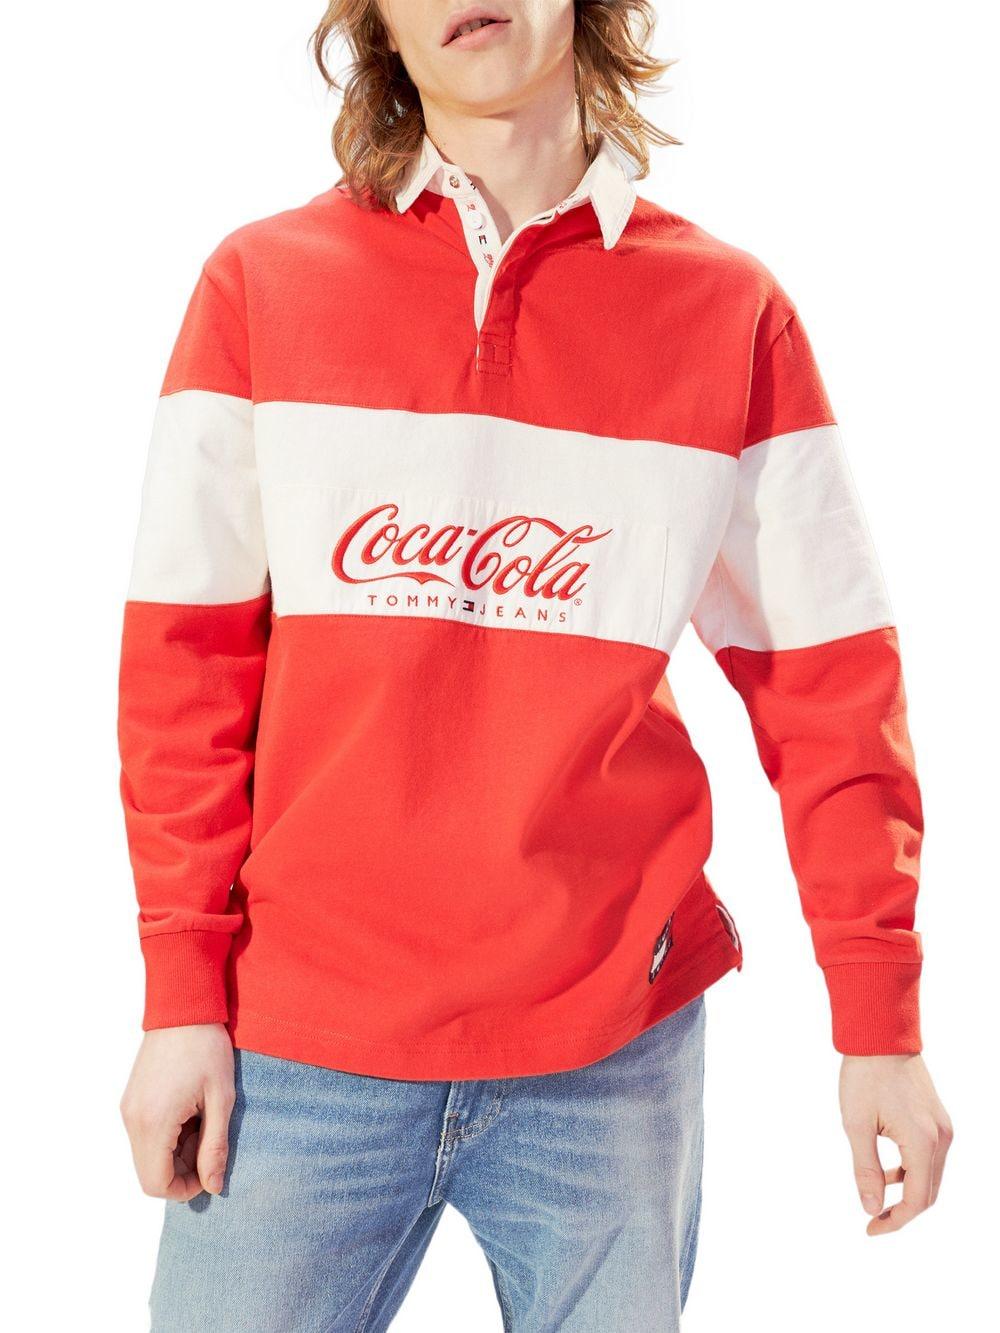 Tommy Hilfiger Tommy X Coca Cola Rugby Shirt in Red for Men | Lyst